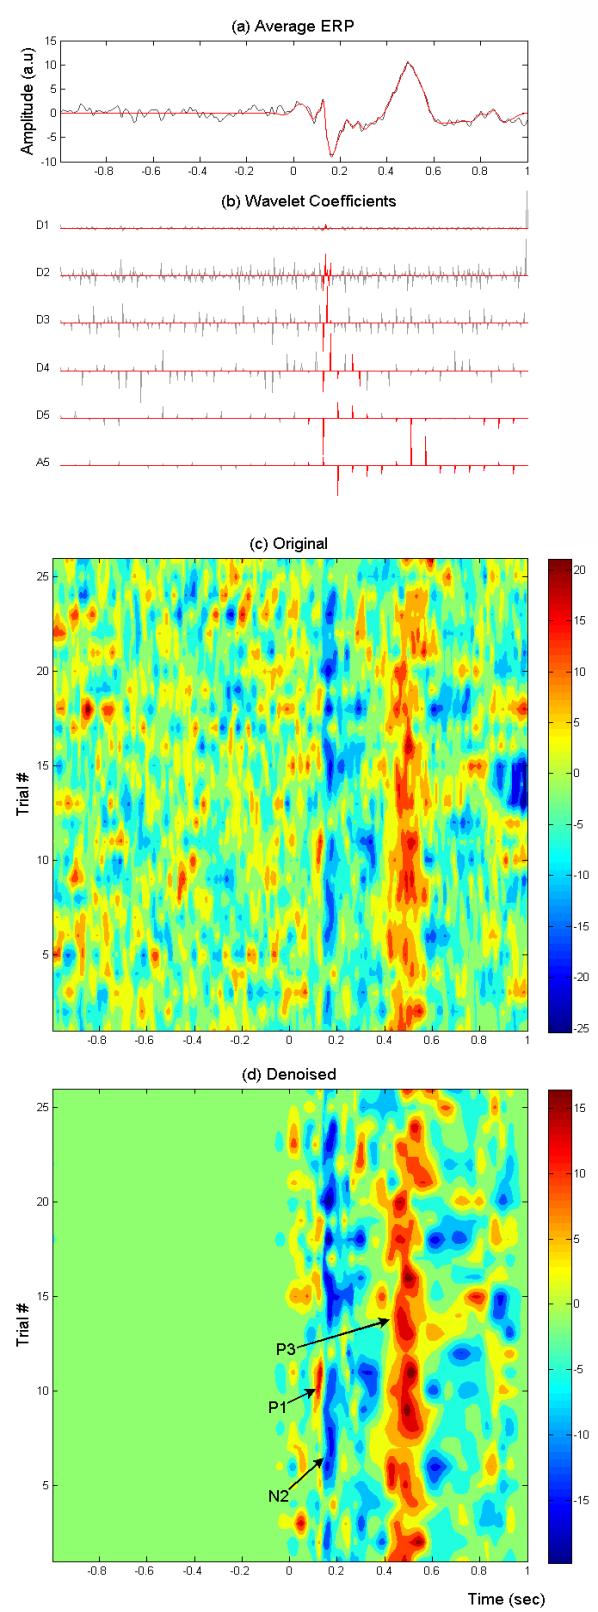 Figure 3.7 Automatic wavelet denoising of a visual ERP recorded from a left occipital (O1) location. (a) Original (grey) and denoised (red) average ERP.